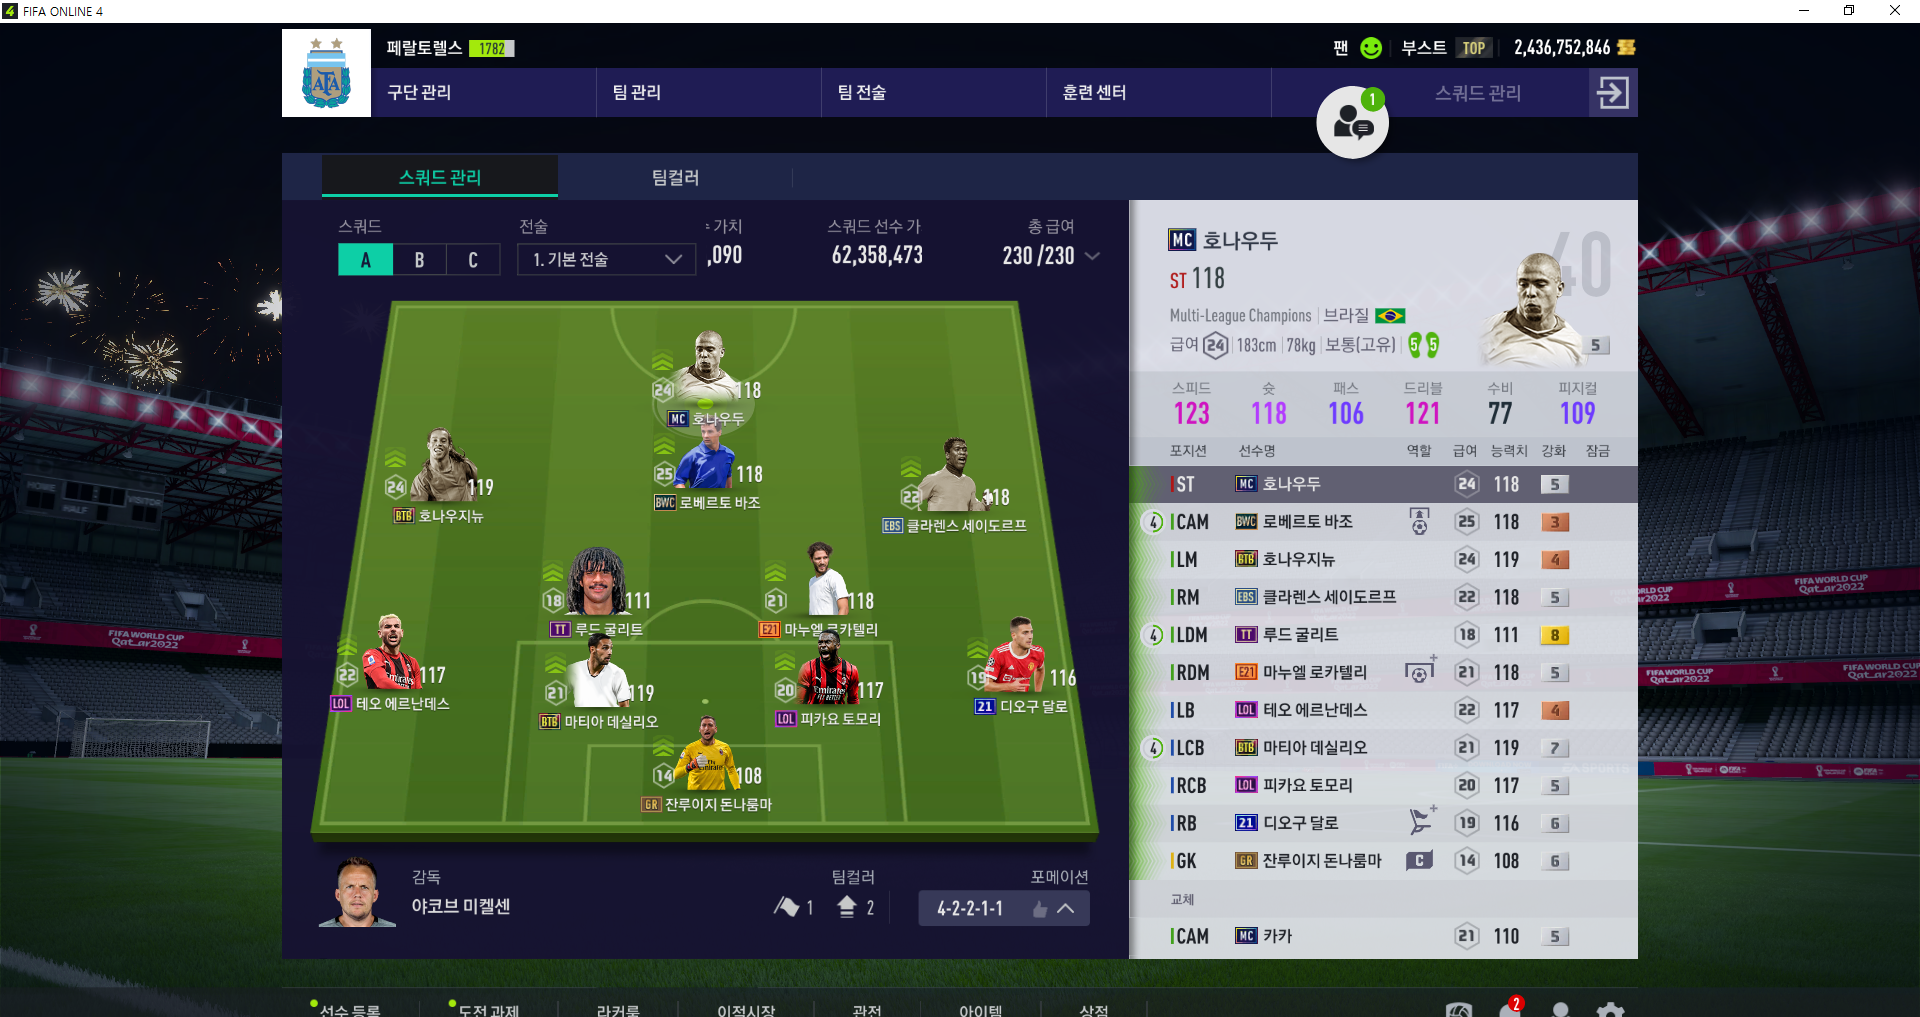 FIFA ONLINE 4 2022-12-02 오후 10_34_54.png